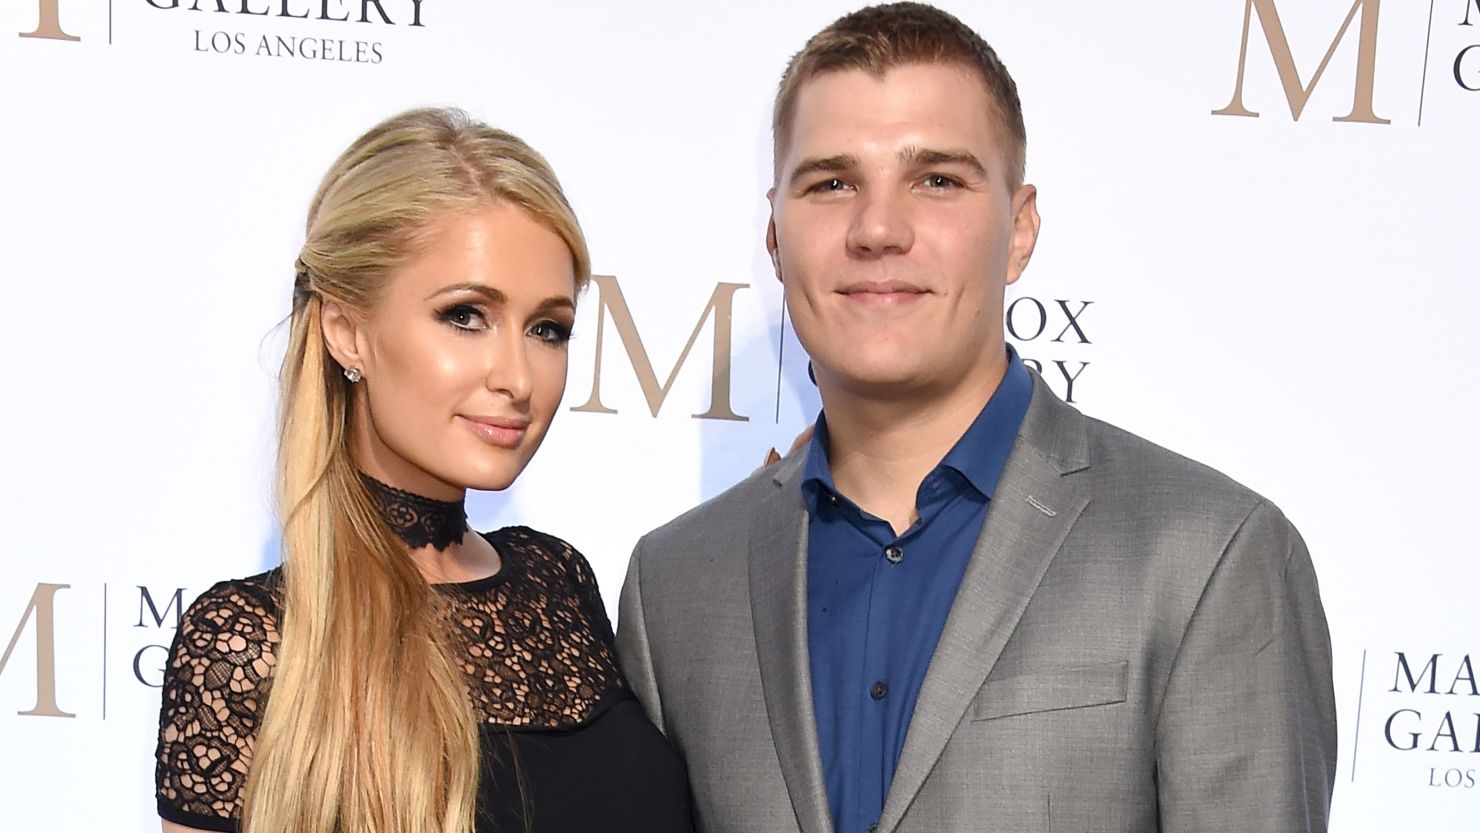 Paris Hilton and Chris Zylka attend the ViP Opening of the "Best Of British" exhibit at Maddox Gallery on October 11 in Los Angeles.  